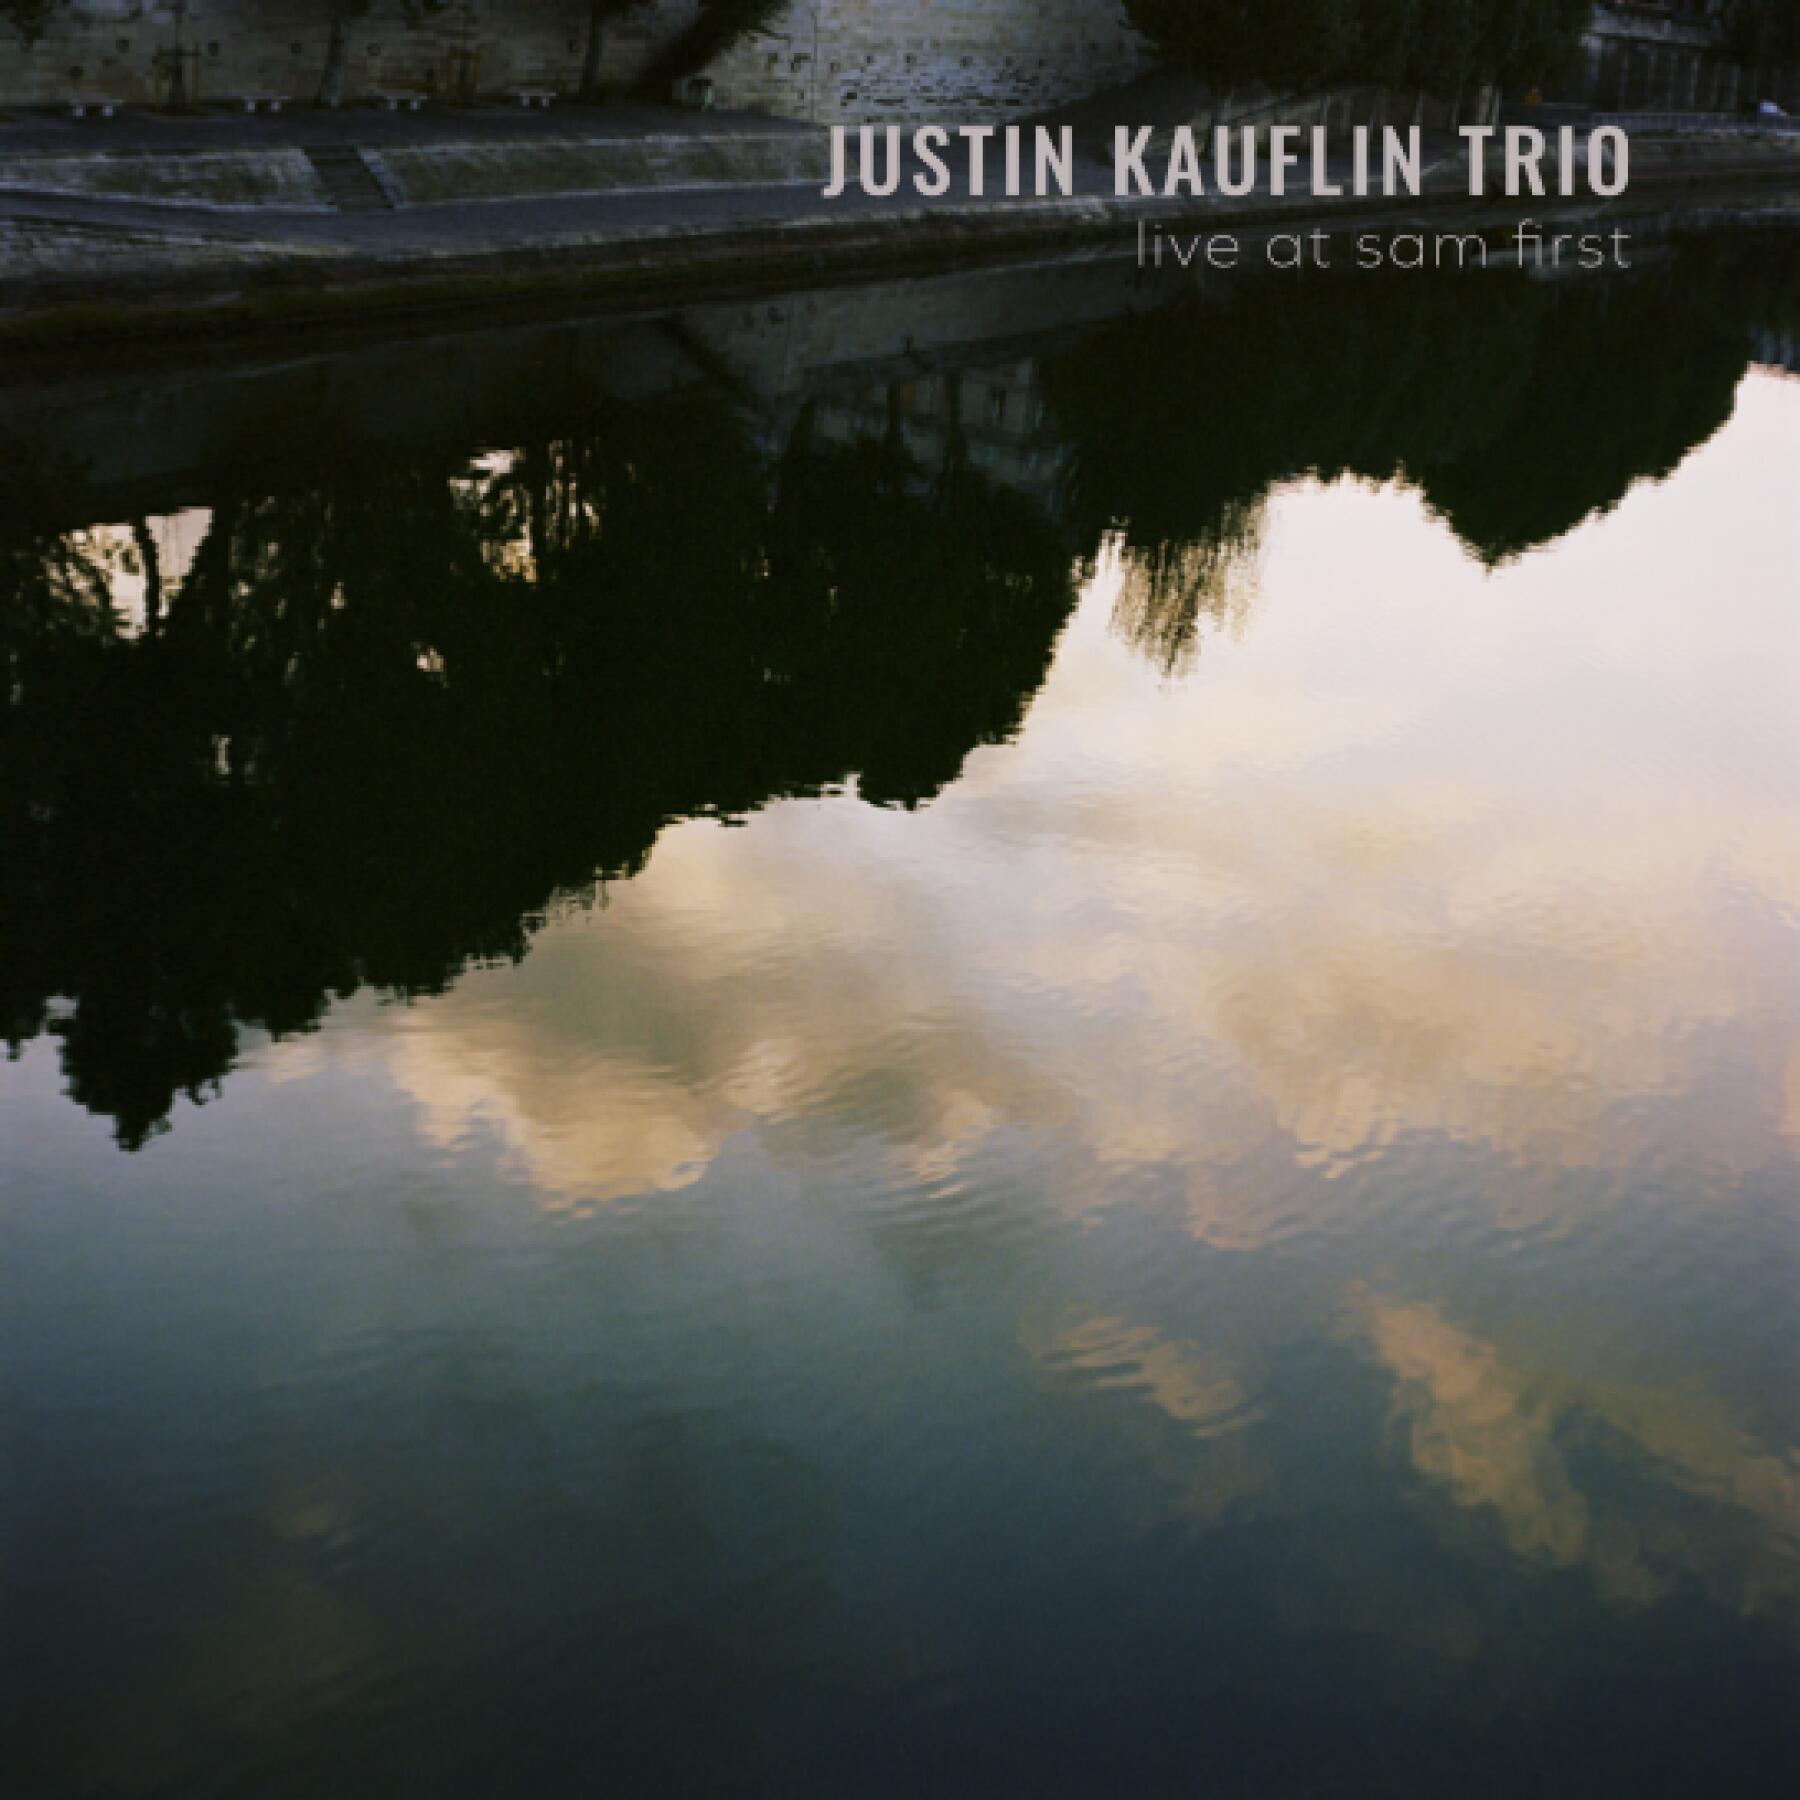 Justin Kauflin Trio: Live at Sam First Digital Download Now Available